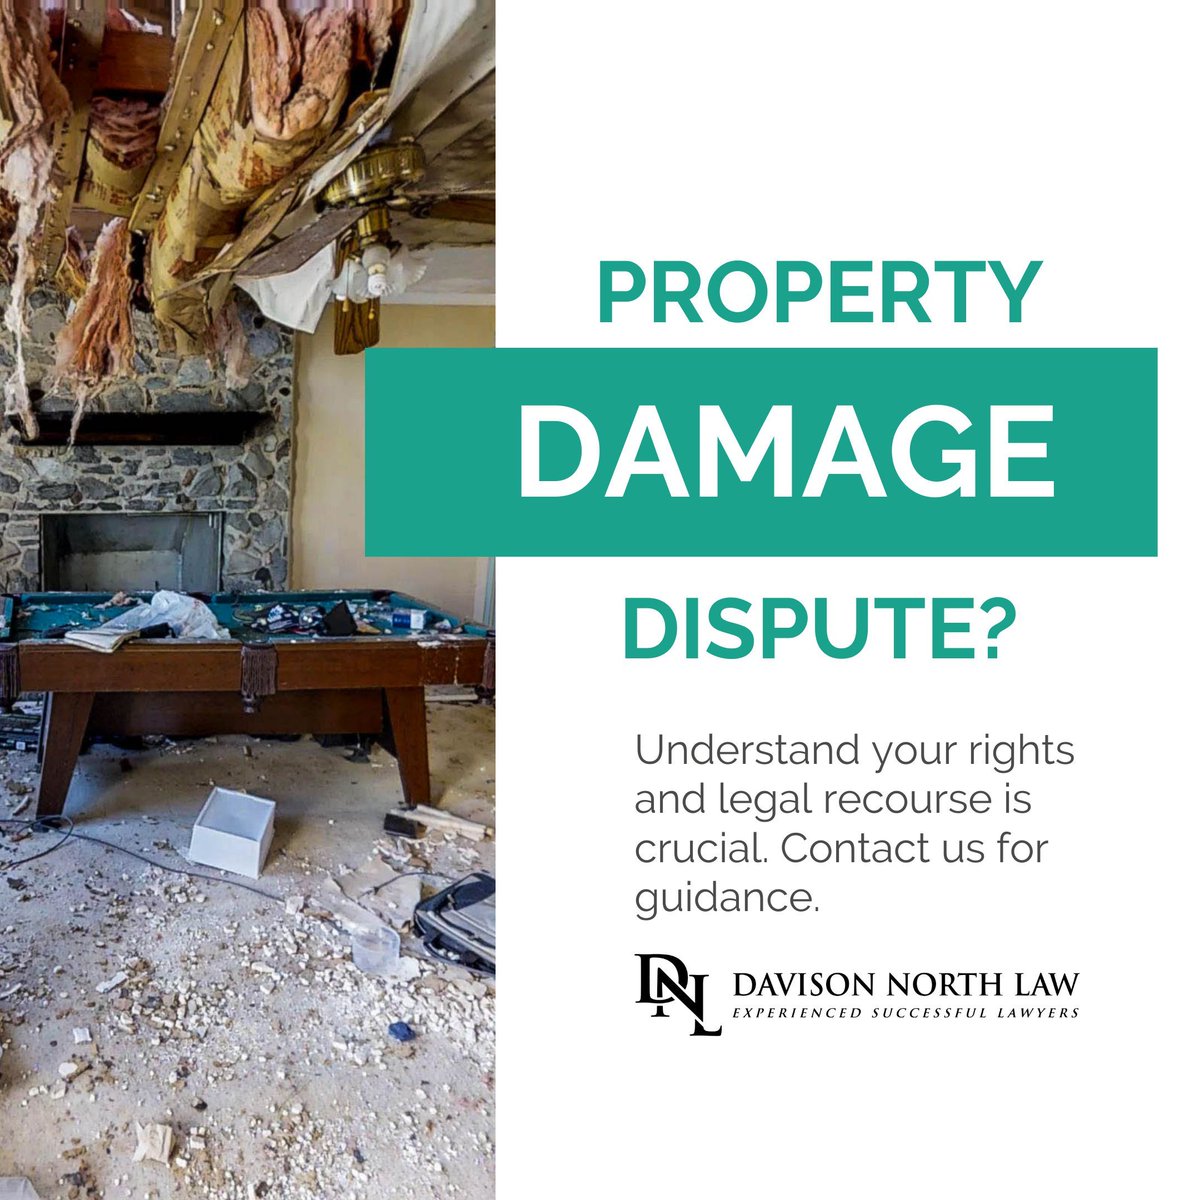 Property damage disputes are a legal maze, whether it's unruly tenants or unexpected issues, having a lawyer by your side is your compass. In tenancy issues, legal advice makes all the difference. Contact our tenancy lawyers today #PropertyDisputes #LegalInsights #tenancylawyers